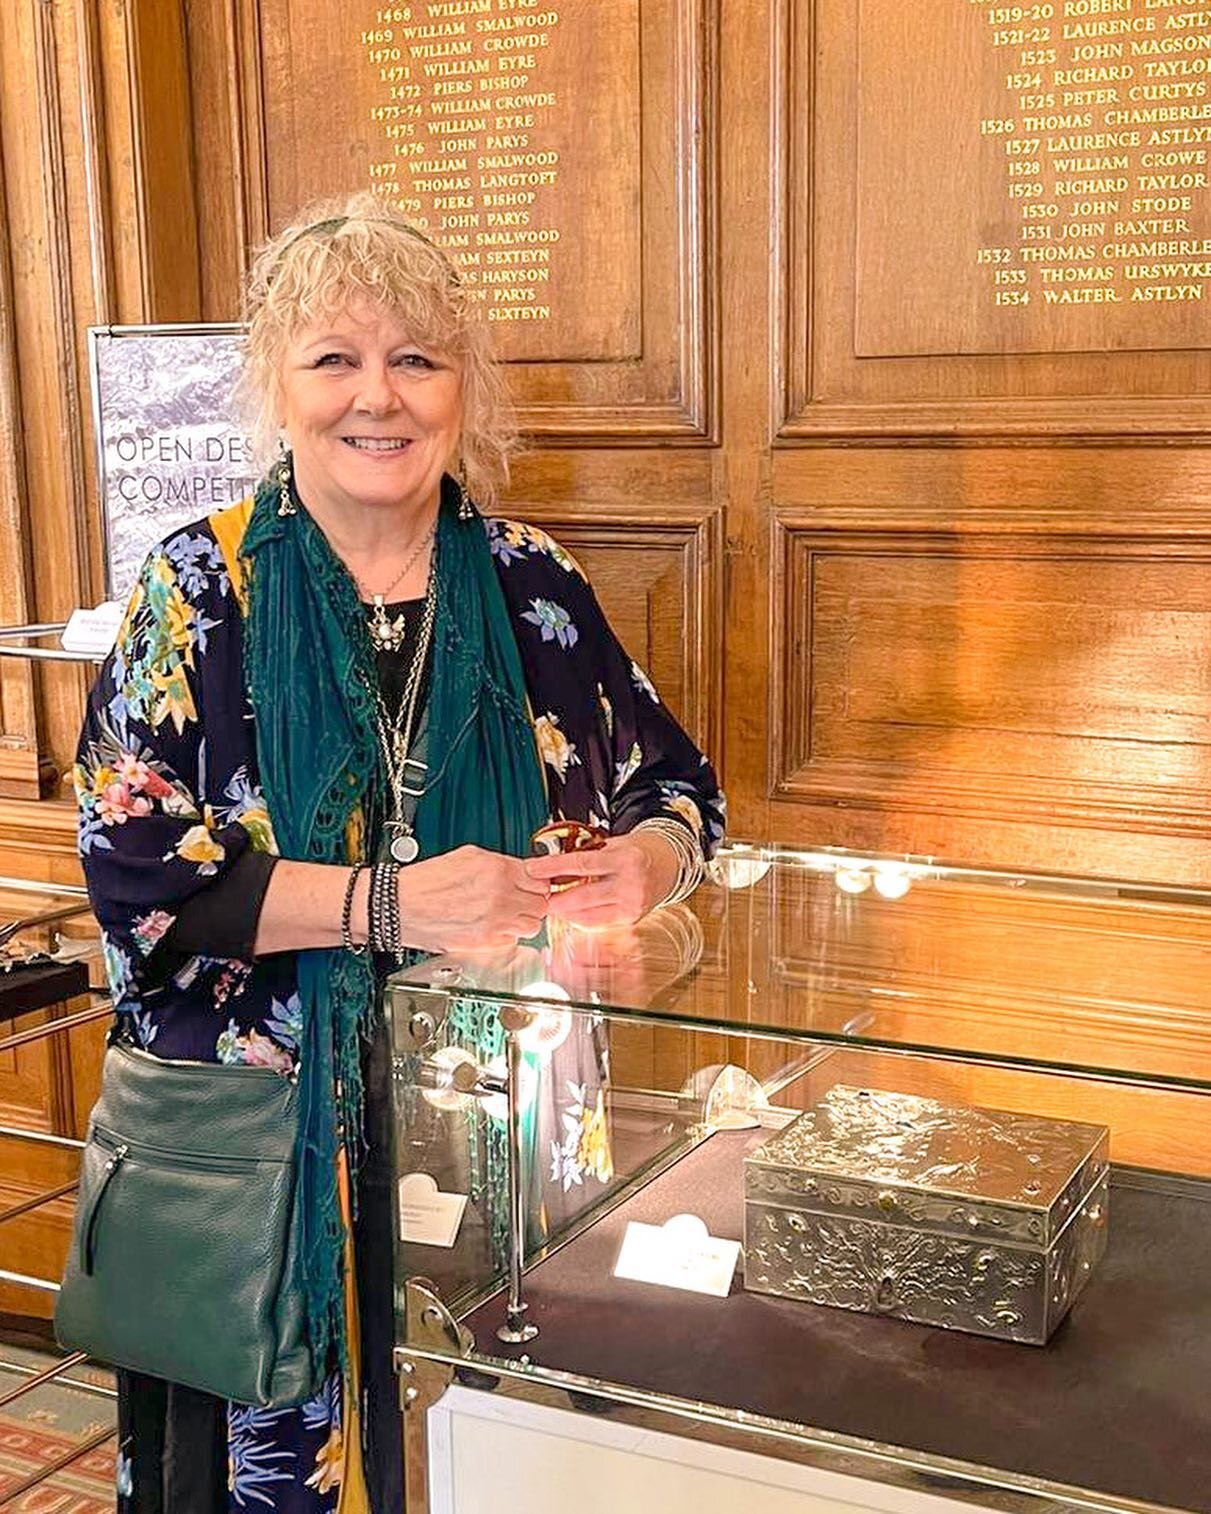 Some very exciting news to share! 

The 34th annual Pewter Live Design Competition took place at Pewterers&rsquo; Hall on 17th &ndash; 19th May 2022 and I was honoured to be one of the artists featured.

It was on this day I found out the most amazin